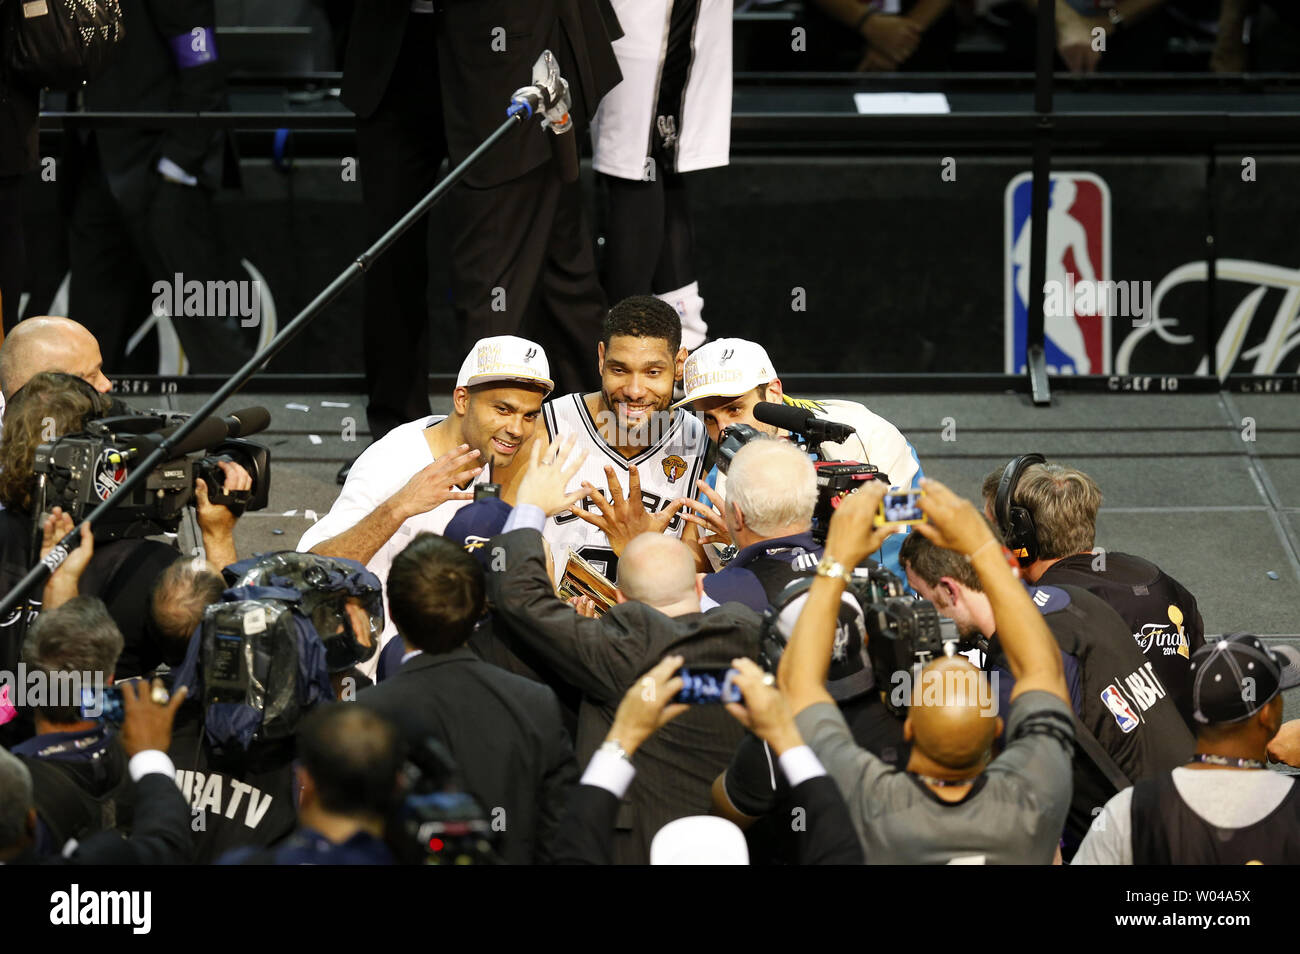 From left to right San Antonio Spurs guard Tony Parker (9), forward Tim Duncan (21) and guard Manu Ginobili (20) celebrate with the Larry O'Brien trophy after defeating the Miami Heat following game 5 of the NBA Finals at the AT&T Center at the AT&T Center in San Antonio, Texas on June 15, 2014. The Spurs defeated the Heat 104-87 to win the best of seven series 4-1.     UPI/Aaron M. Sprecher Stock Photo